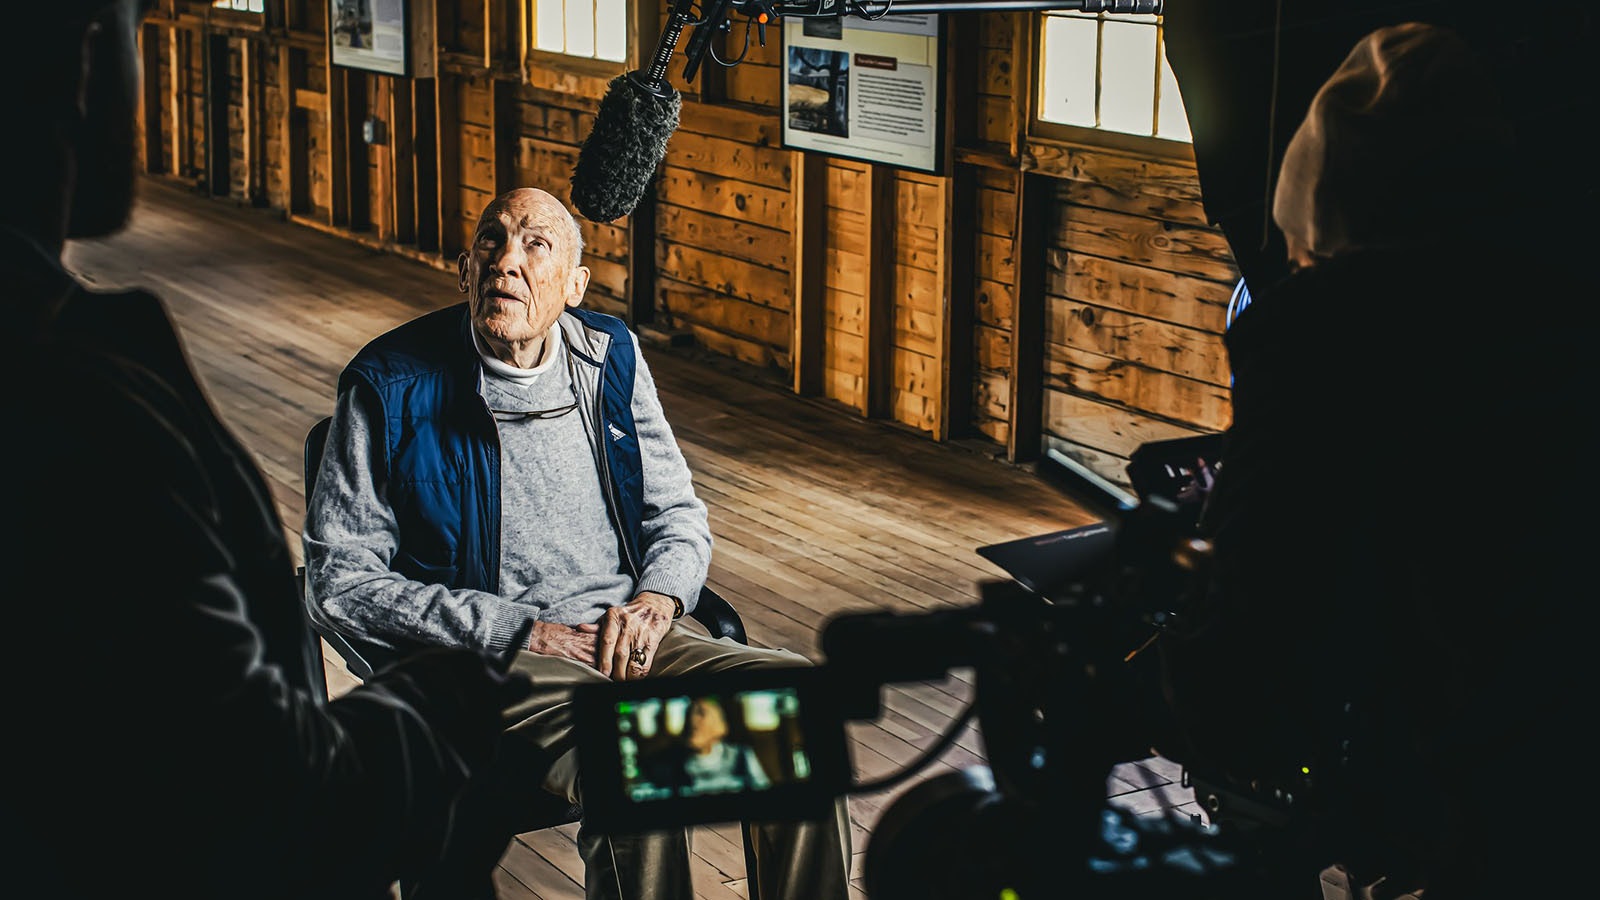 Former U.S. Sen. Al Simpson being interviewed at the Heart Mountain Interpretive Center for the NFL documentary "9066: Fear, Football, and the Theft of Freedom."